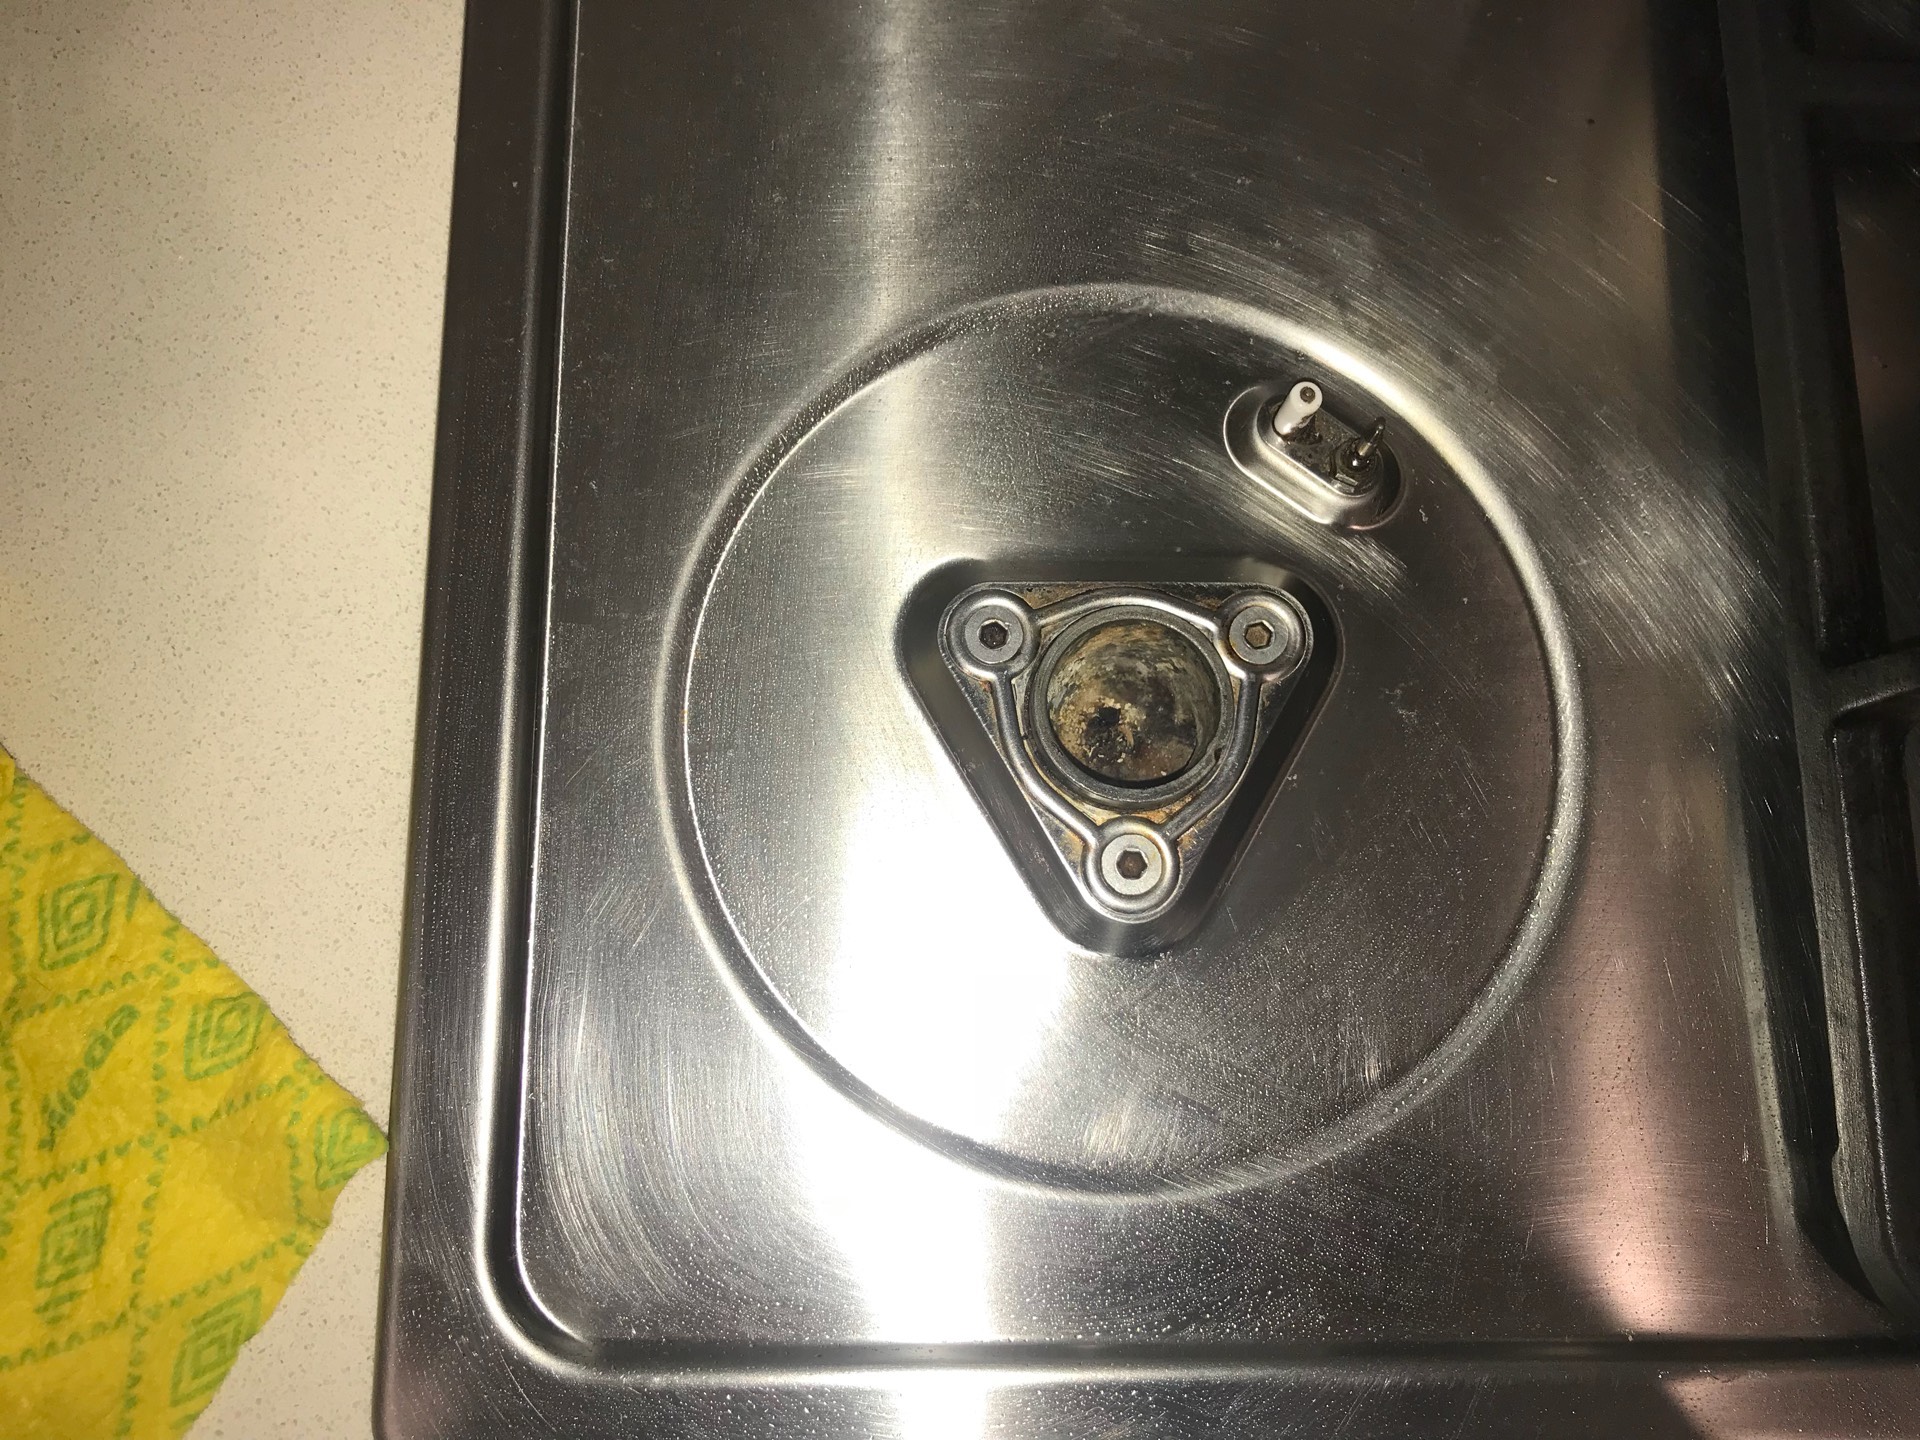 Kitchen chrome stove cleaning after